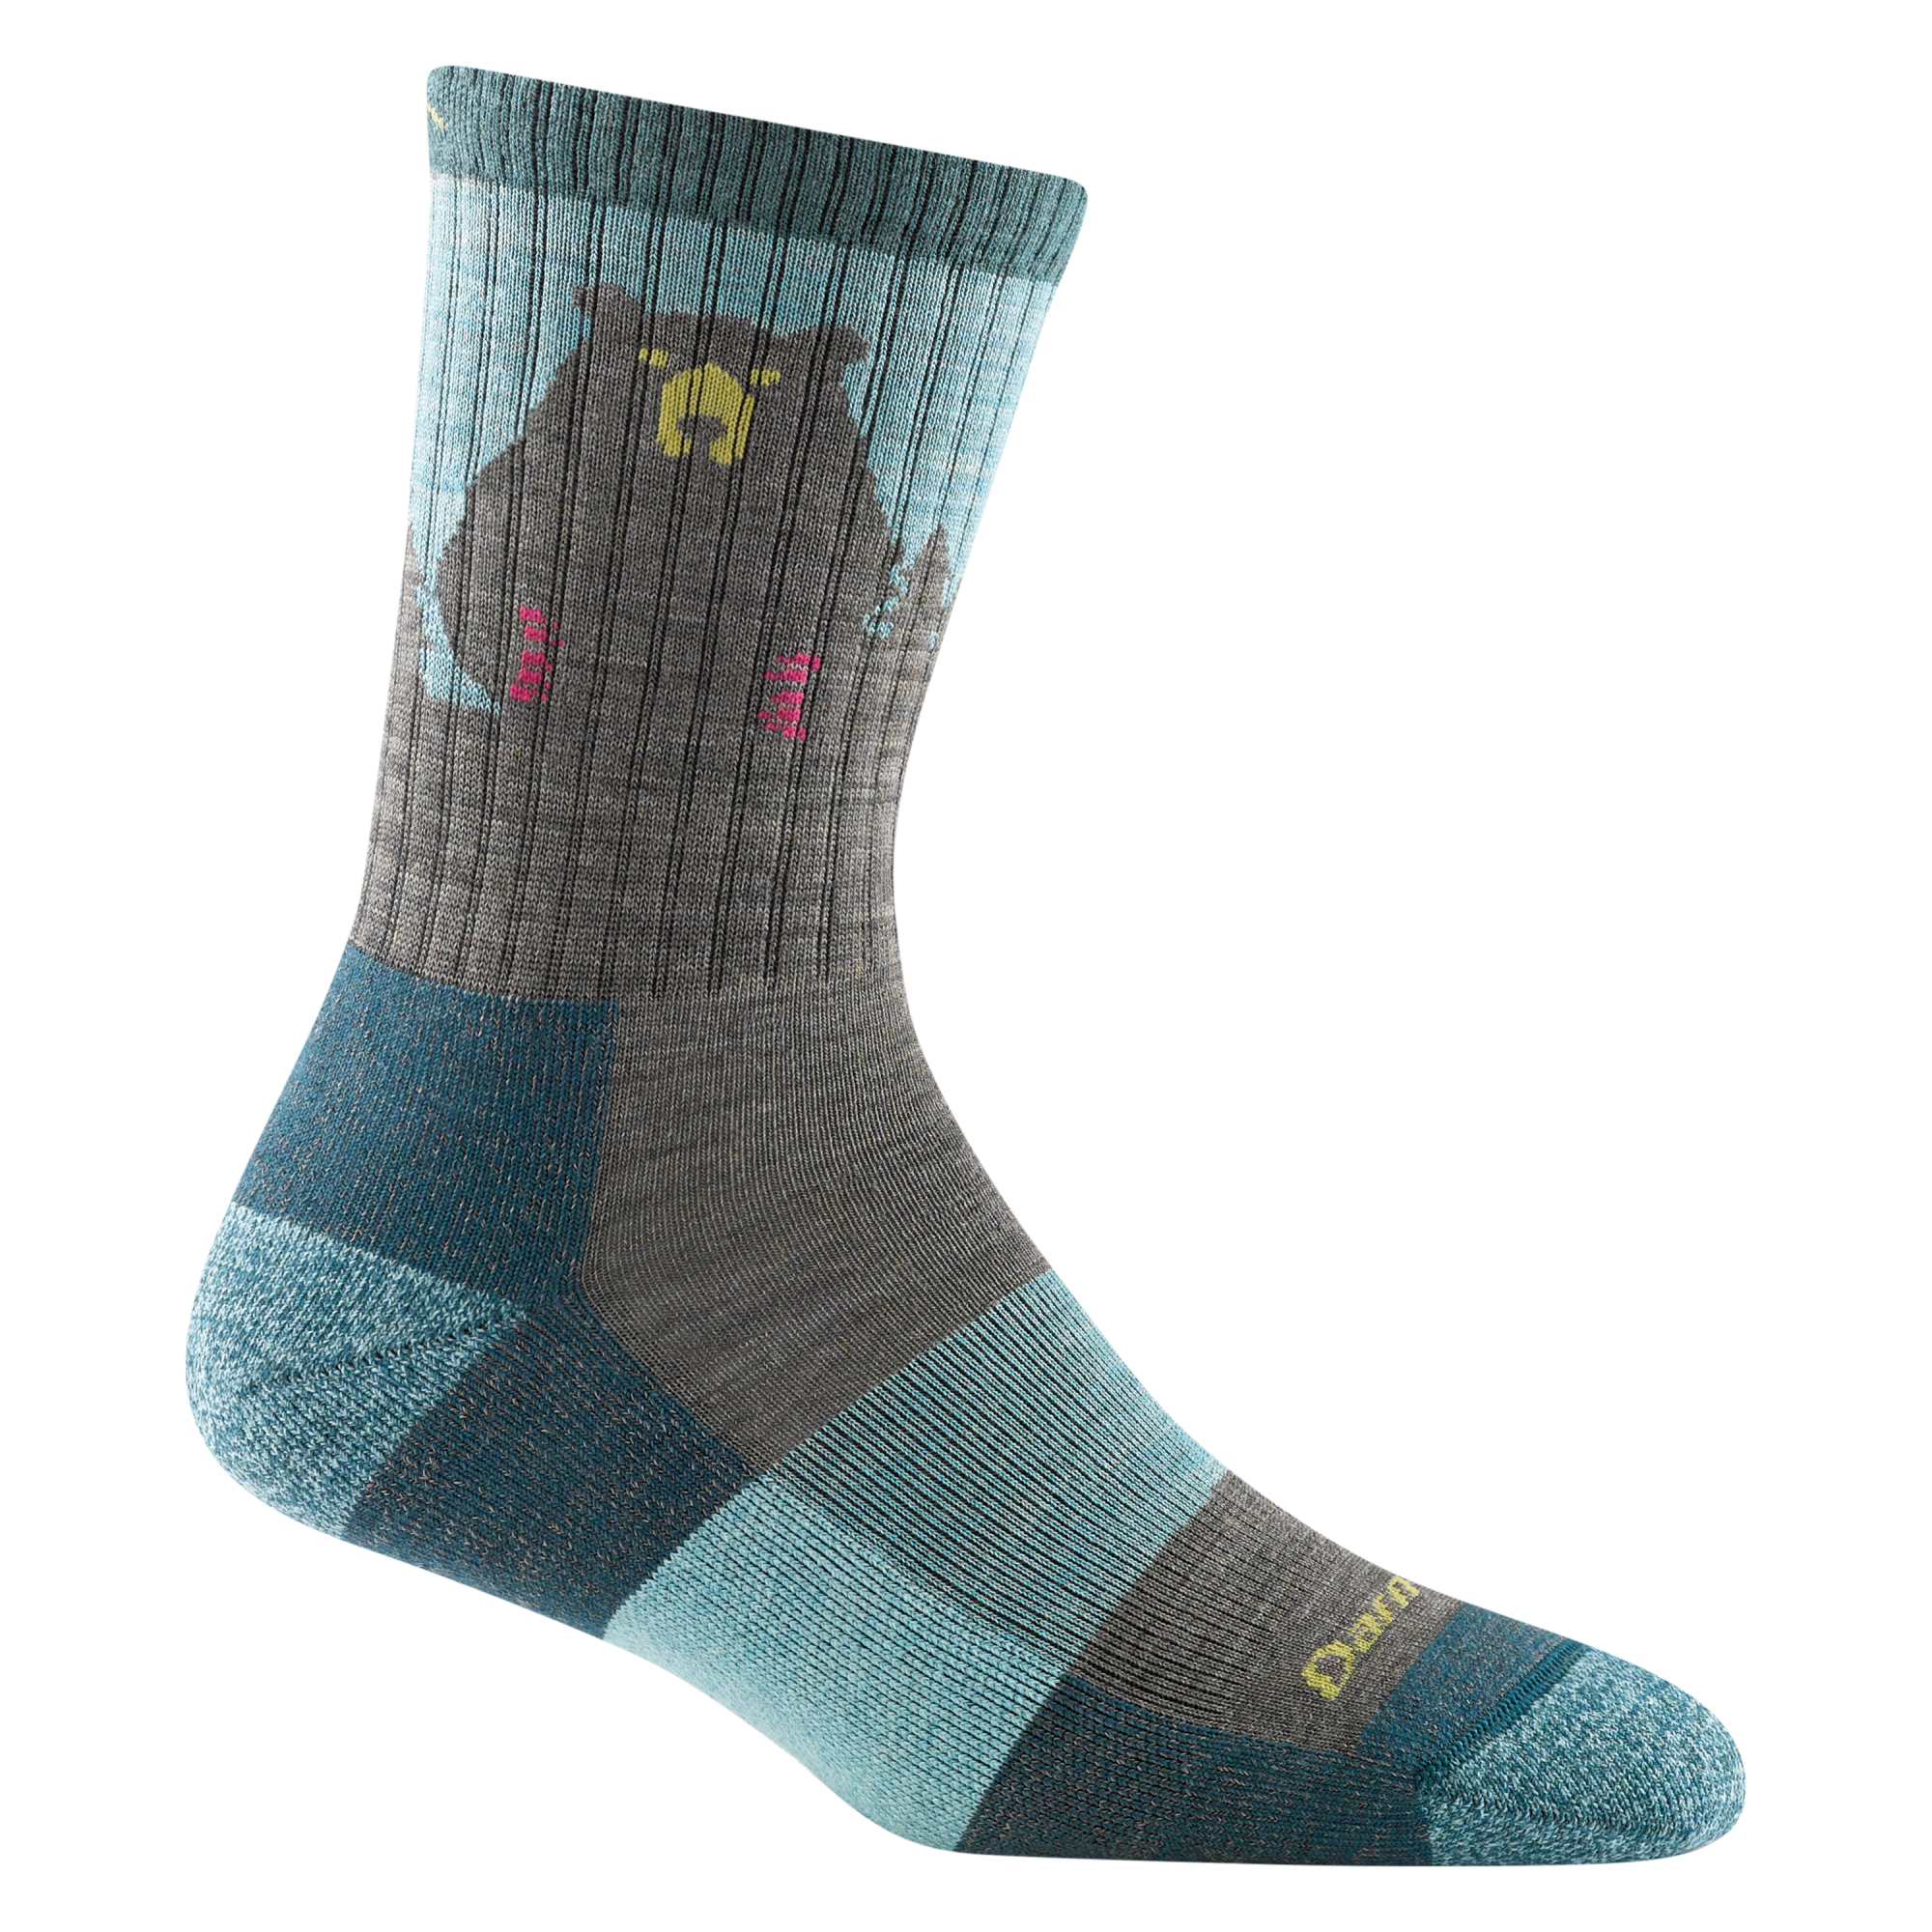 1970 women's bear town micro crew hiking sock in aqua with light blue toe/heel accents and gray bear design on calf